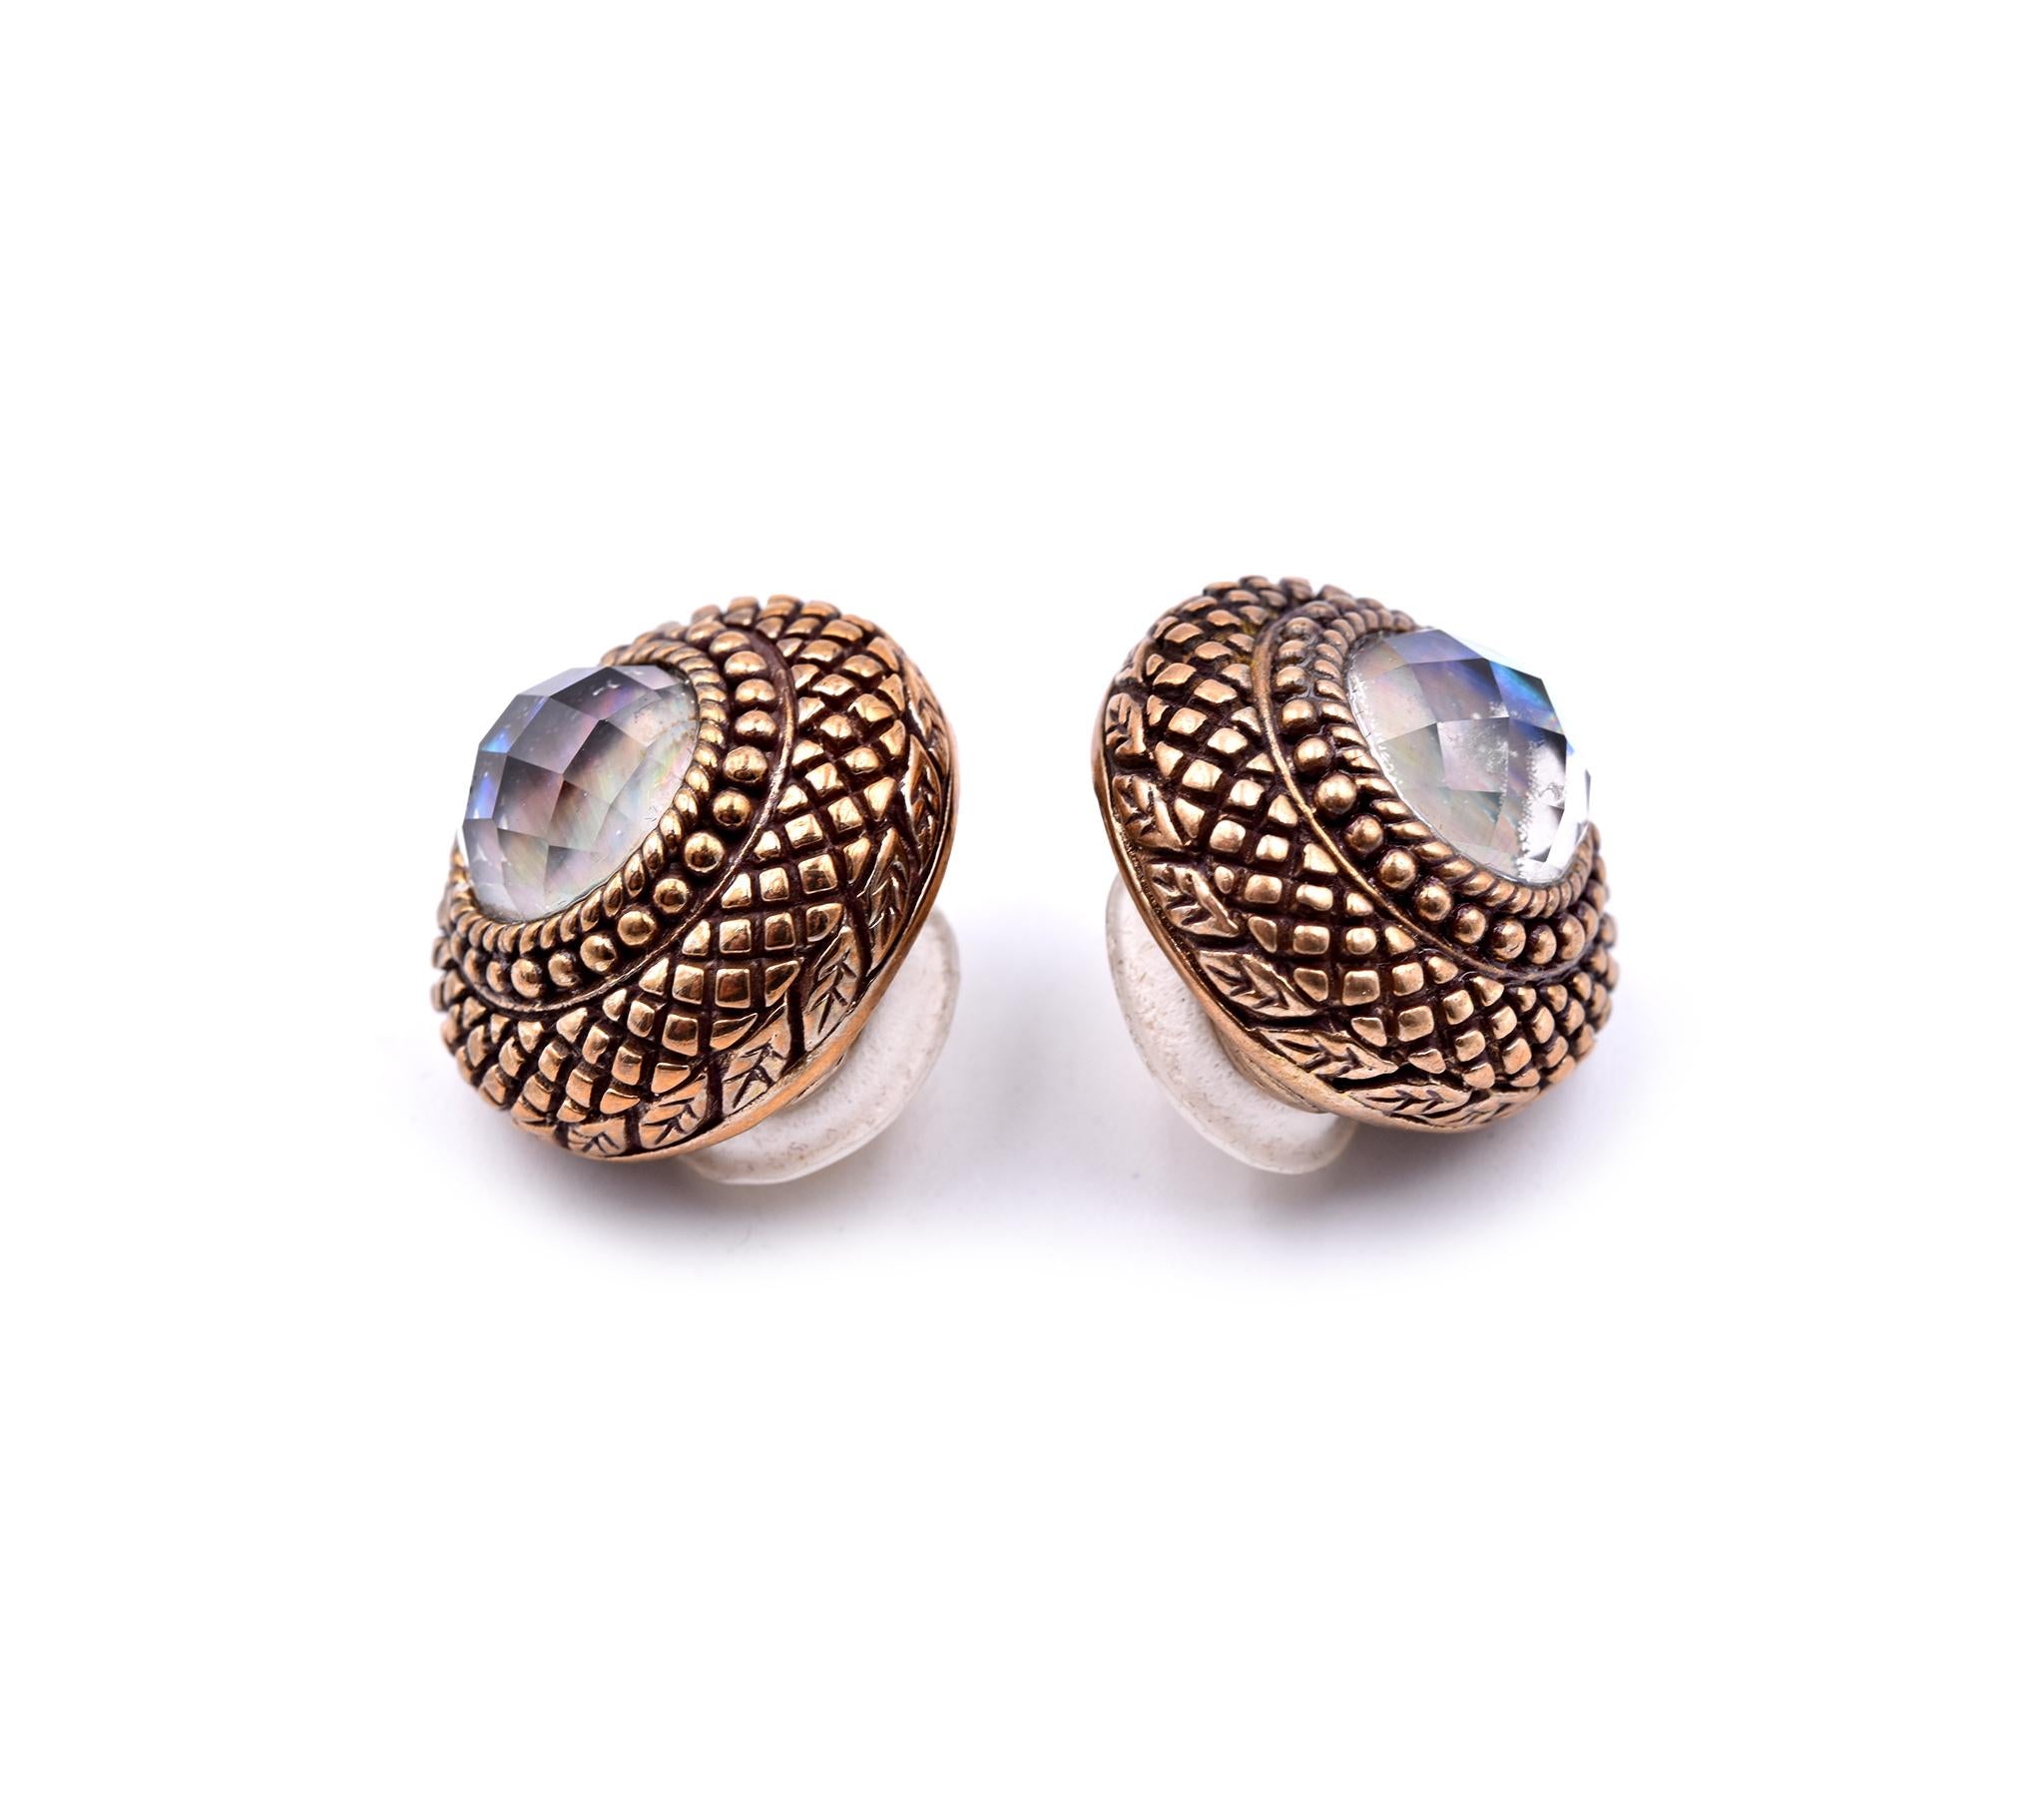 Designer: Stephen Dweck
Material: sterling silver, rock crystal with Mother-of-Pearl inlay
Dimensions: earrings measure 20.75mm in diameter
Fastenings: clip-on
Weight: 18.42 grams
